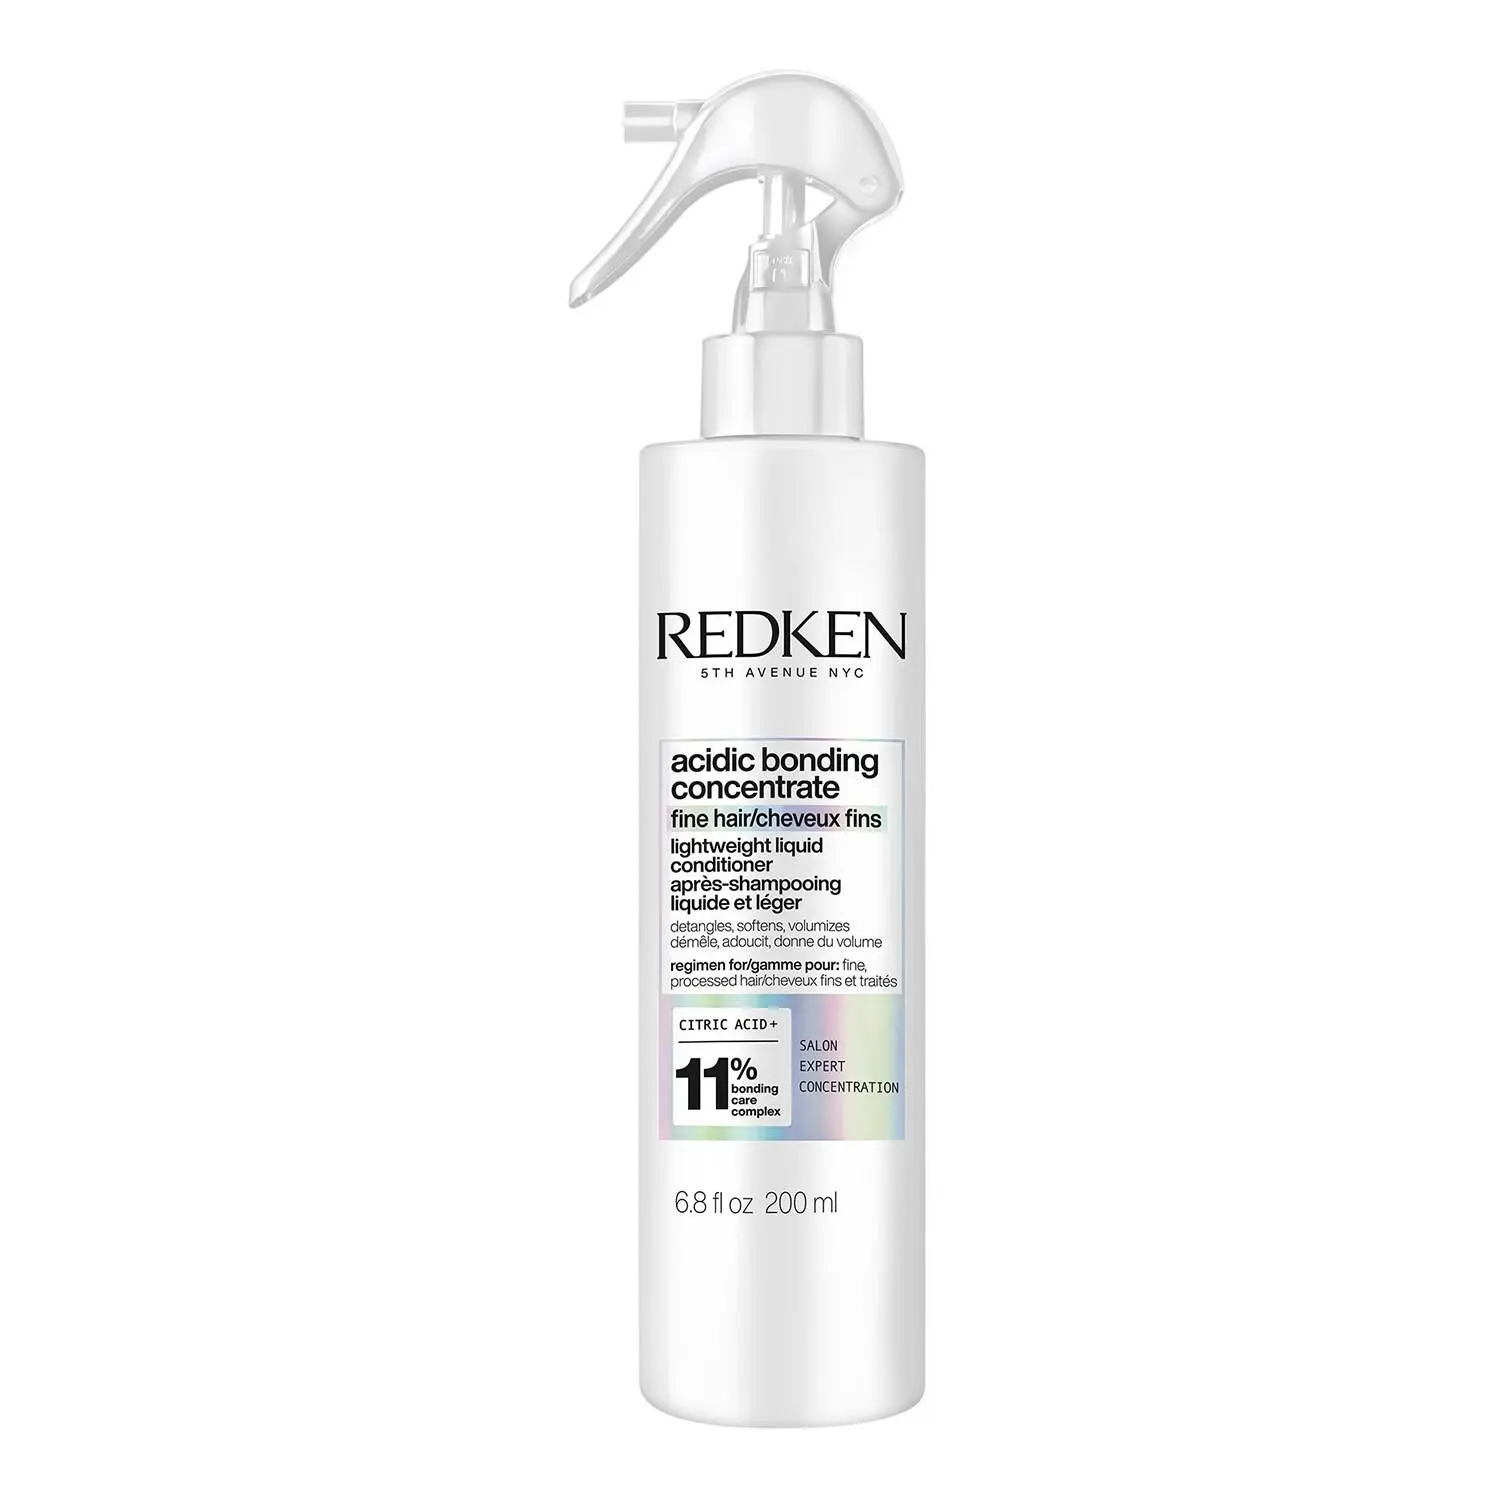 Redken Acidic Bonding Concentrate Lightweight Liquid Conditioner for Fine Hair Discounts and Cashback